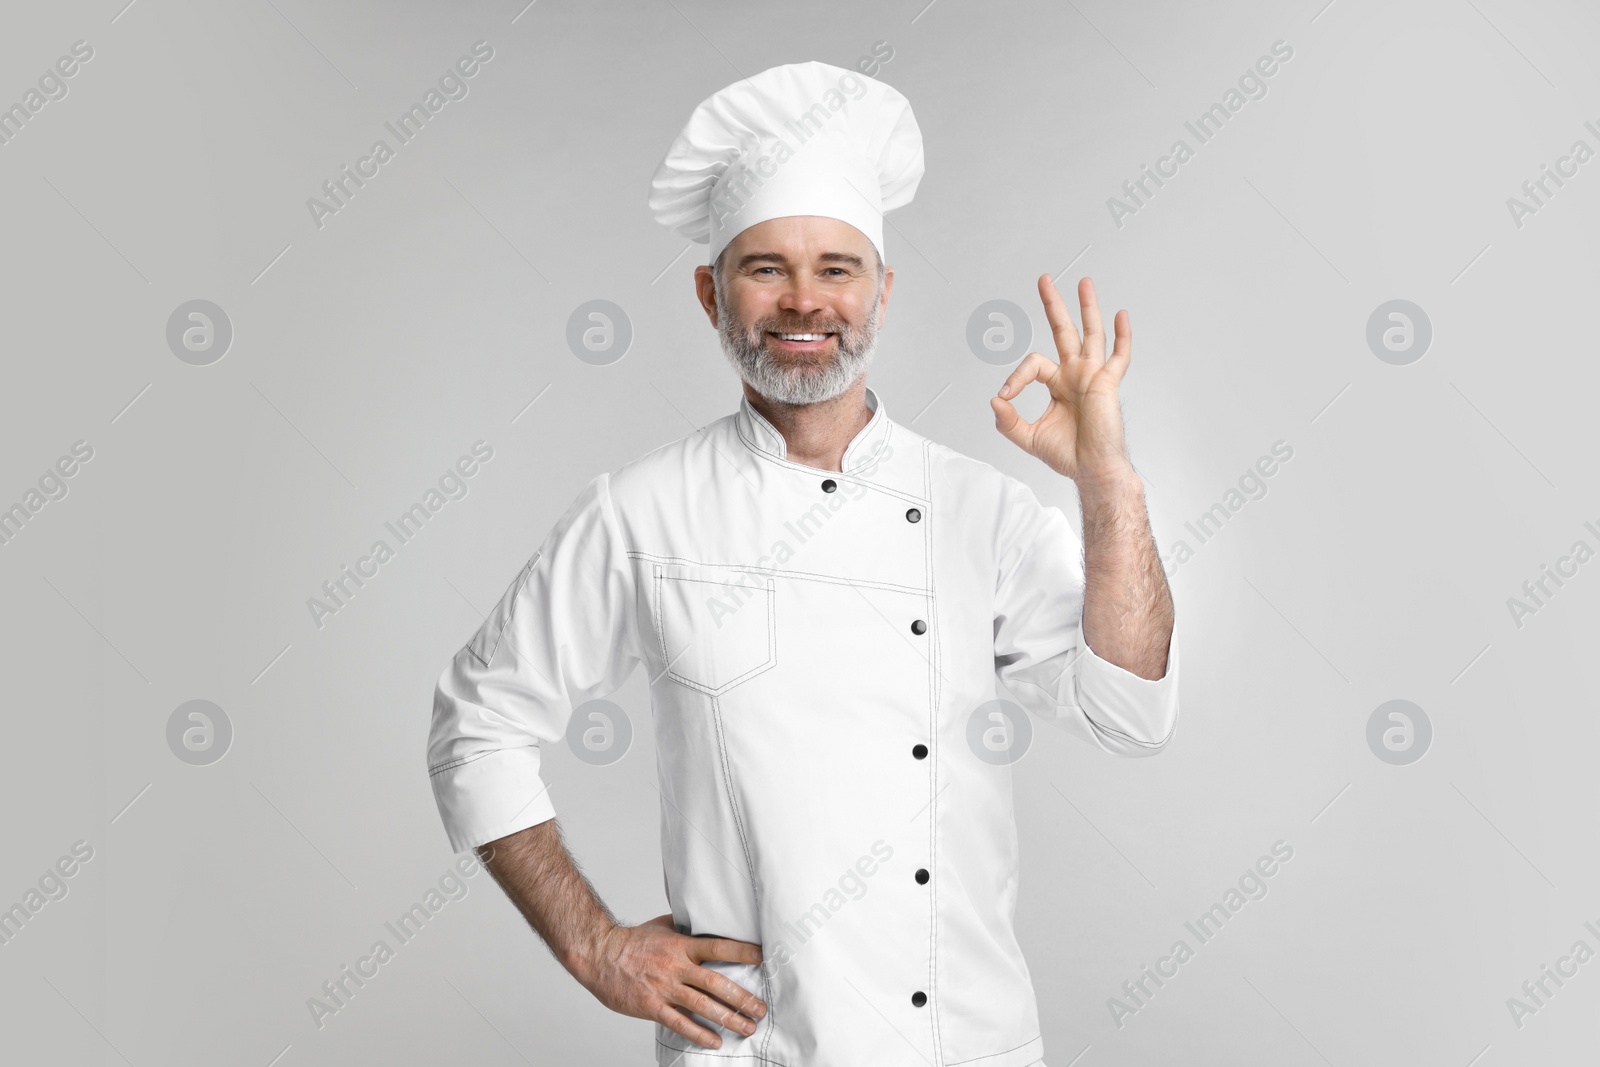 Photo of Happy chef in uniform showing OK gesture on grey background